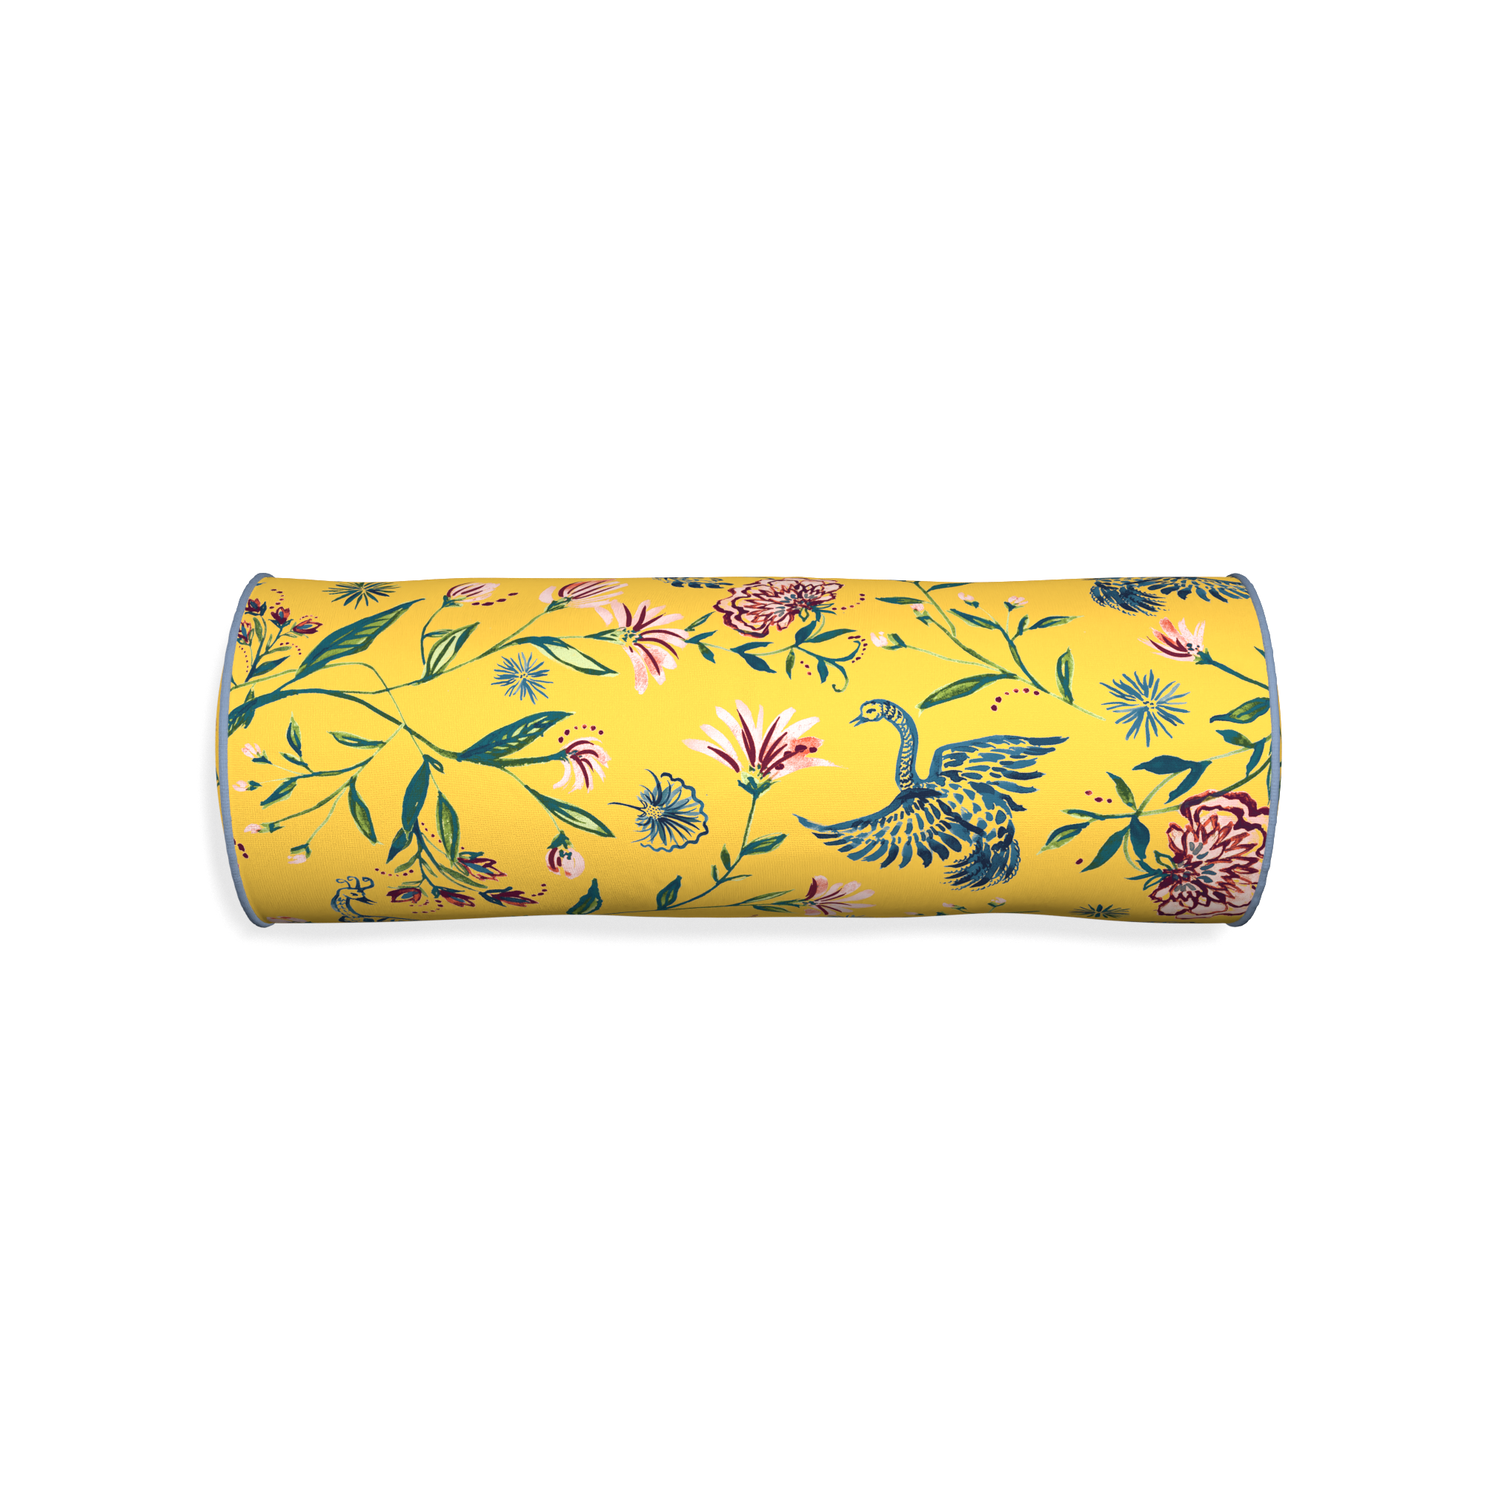 Bolster daphne canary custom yellow chinoiseriepillow with sky piping on white background